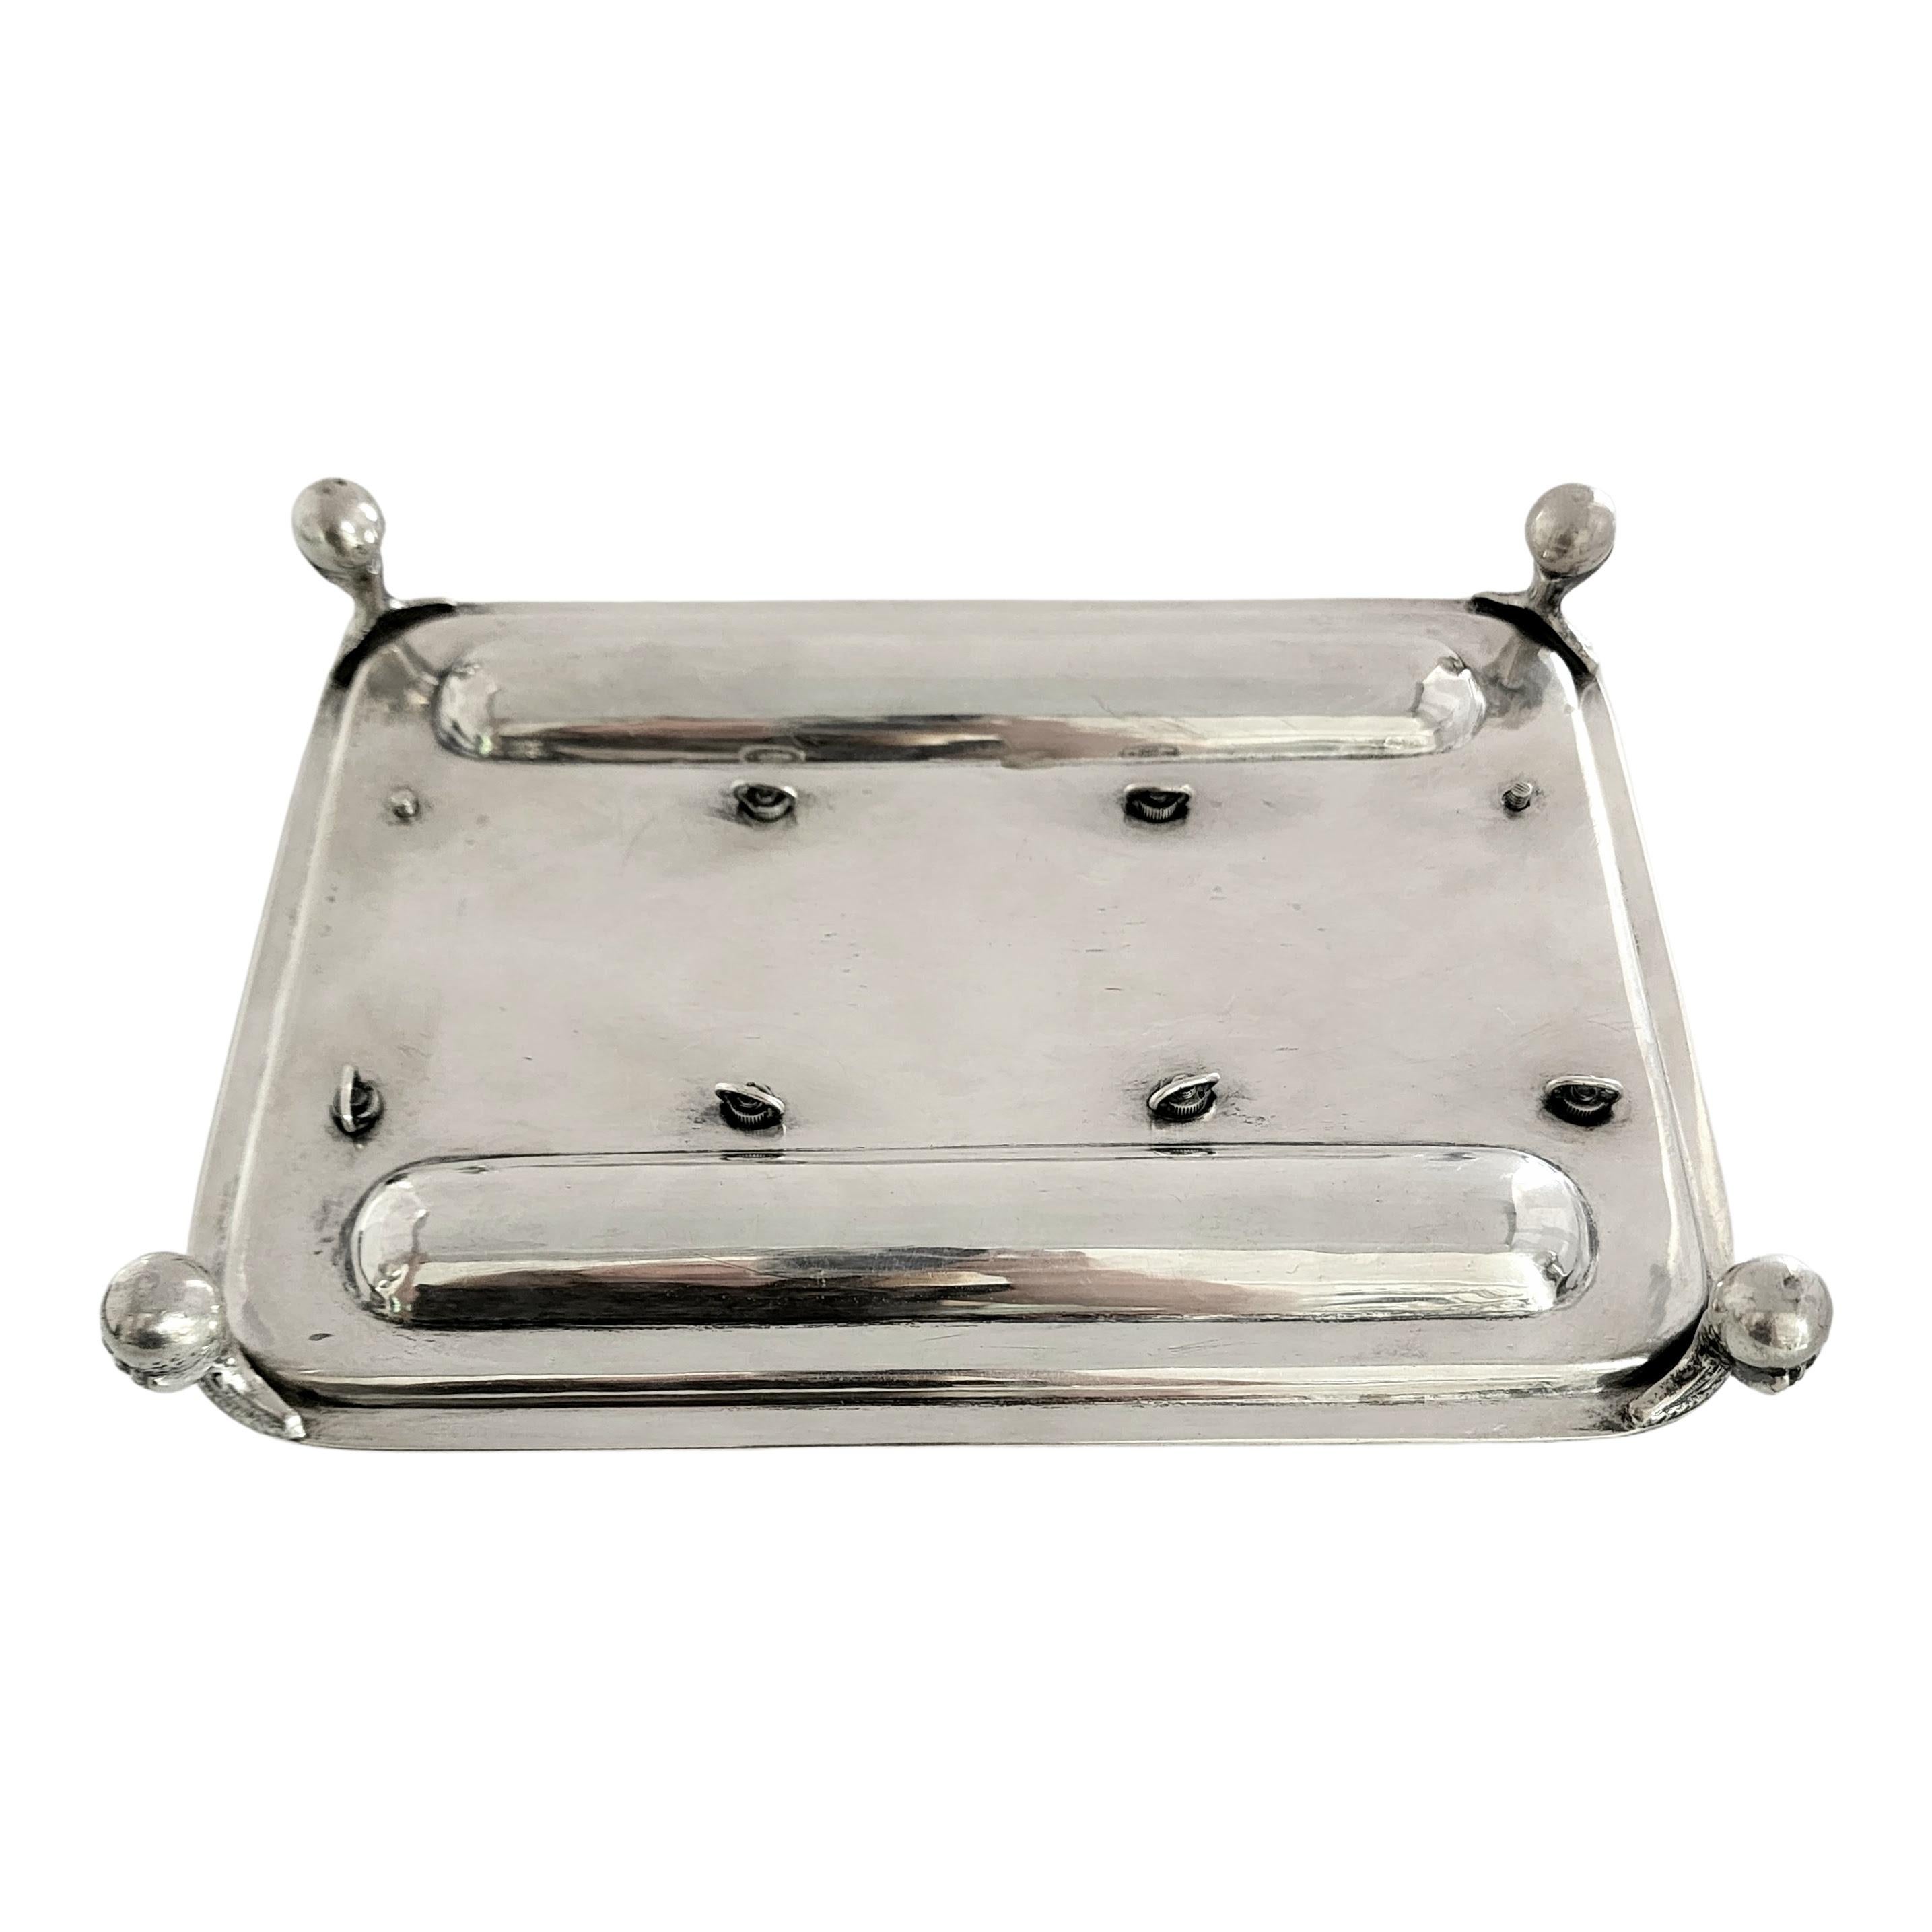 John Grinsell & Sons Birmingham England Sterling Inkwell Inkstand Desk Set In Good Condition For Sale In Washington Depot, CT